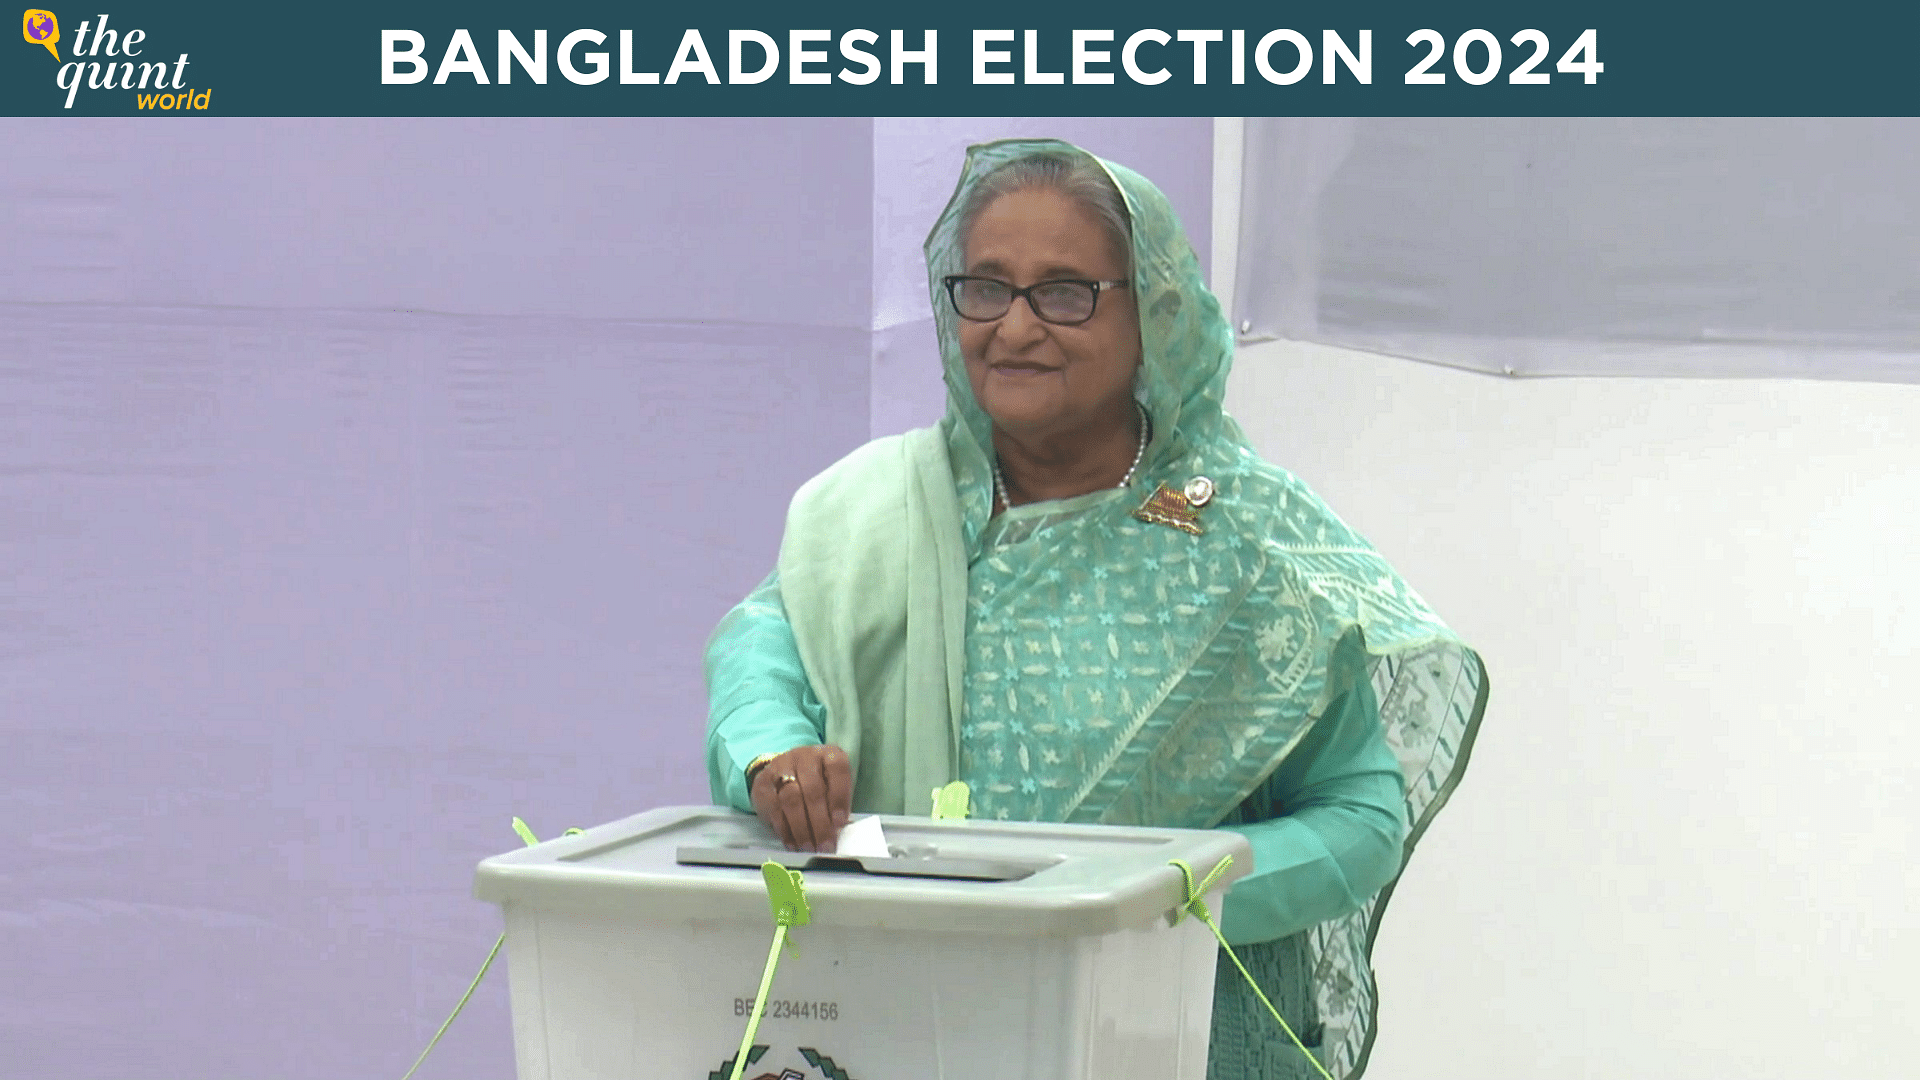 Bangladesh Elections 2024 Sheikh Hasina Wins Fifth Term in Polls